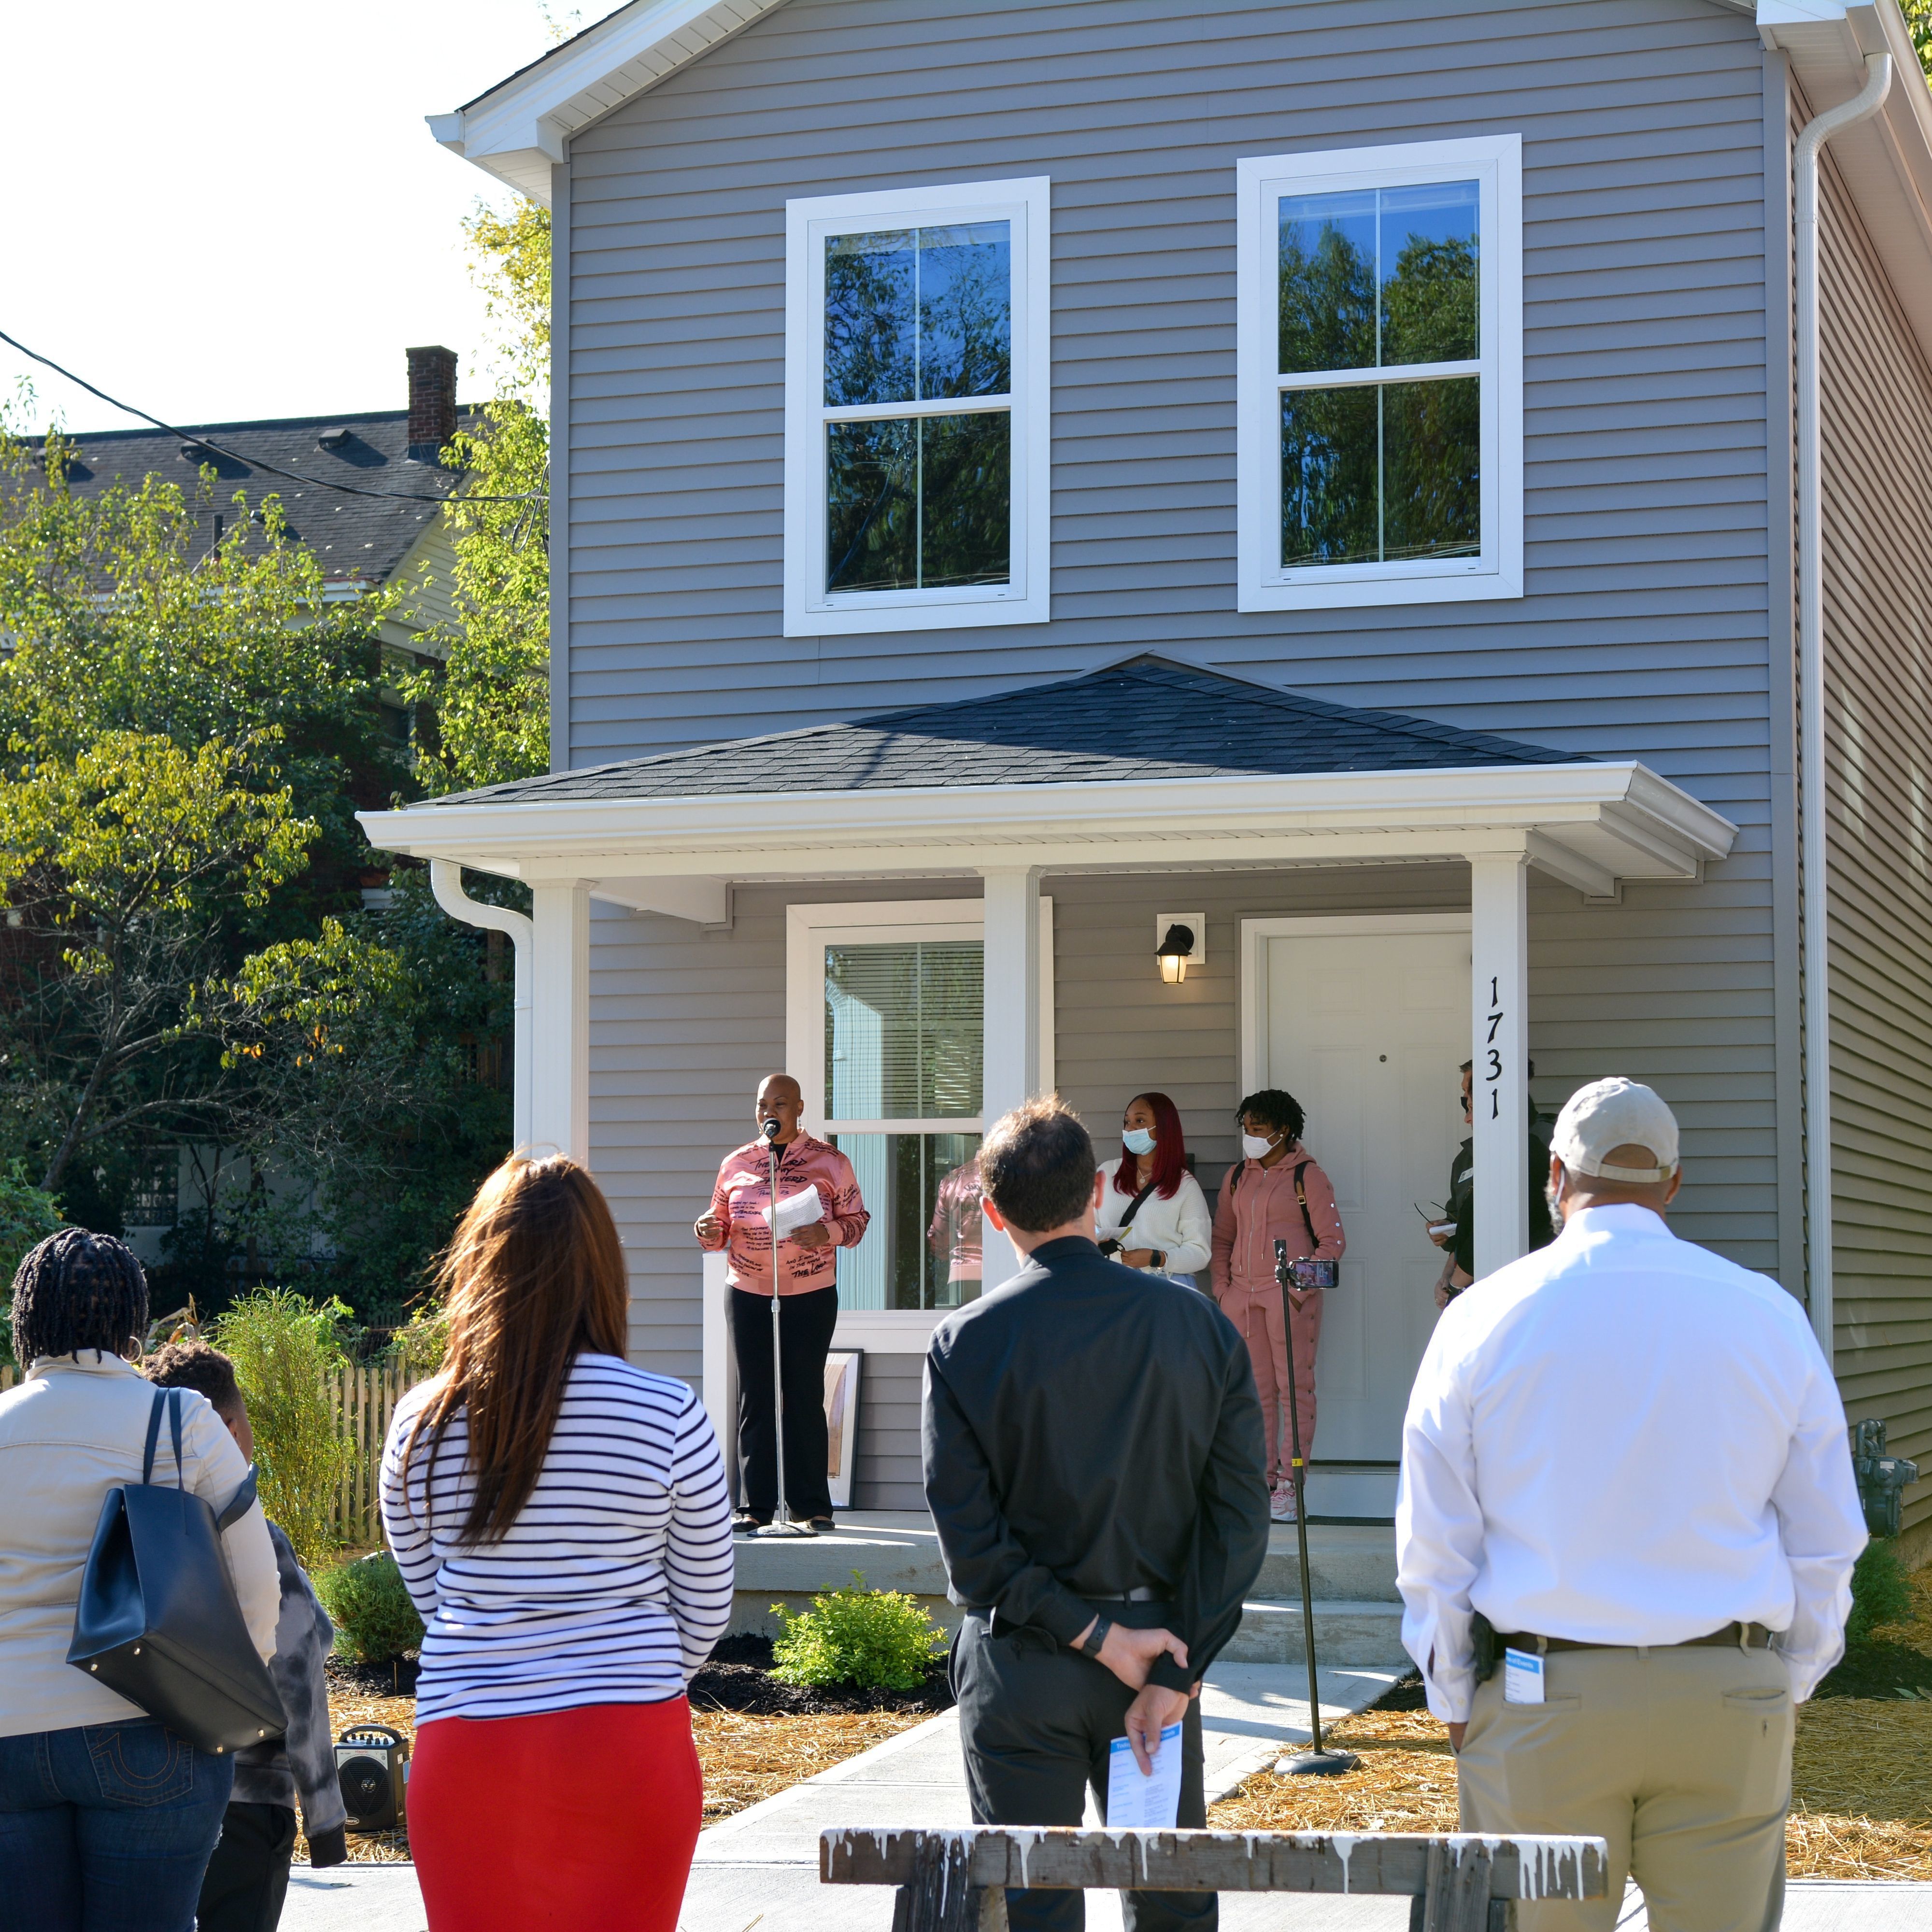 Habitat for Humanity of Greater Cincinnati earned two LEED Gold certifications for homes to be built in Evanston.